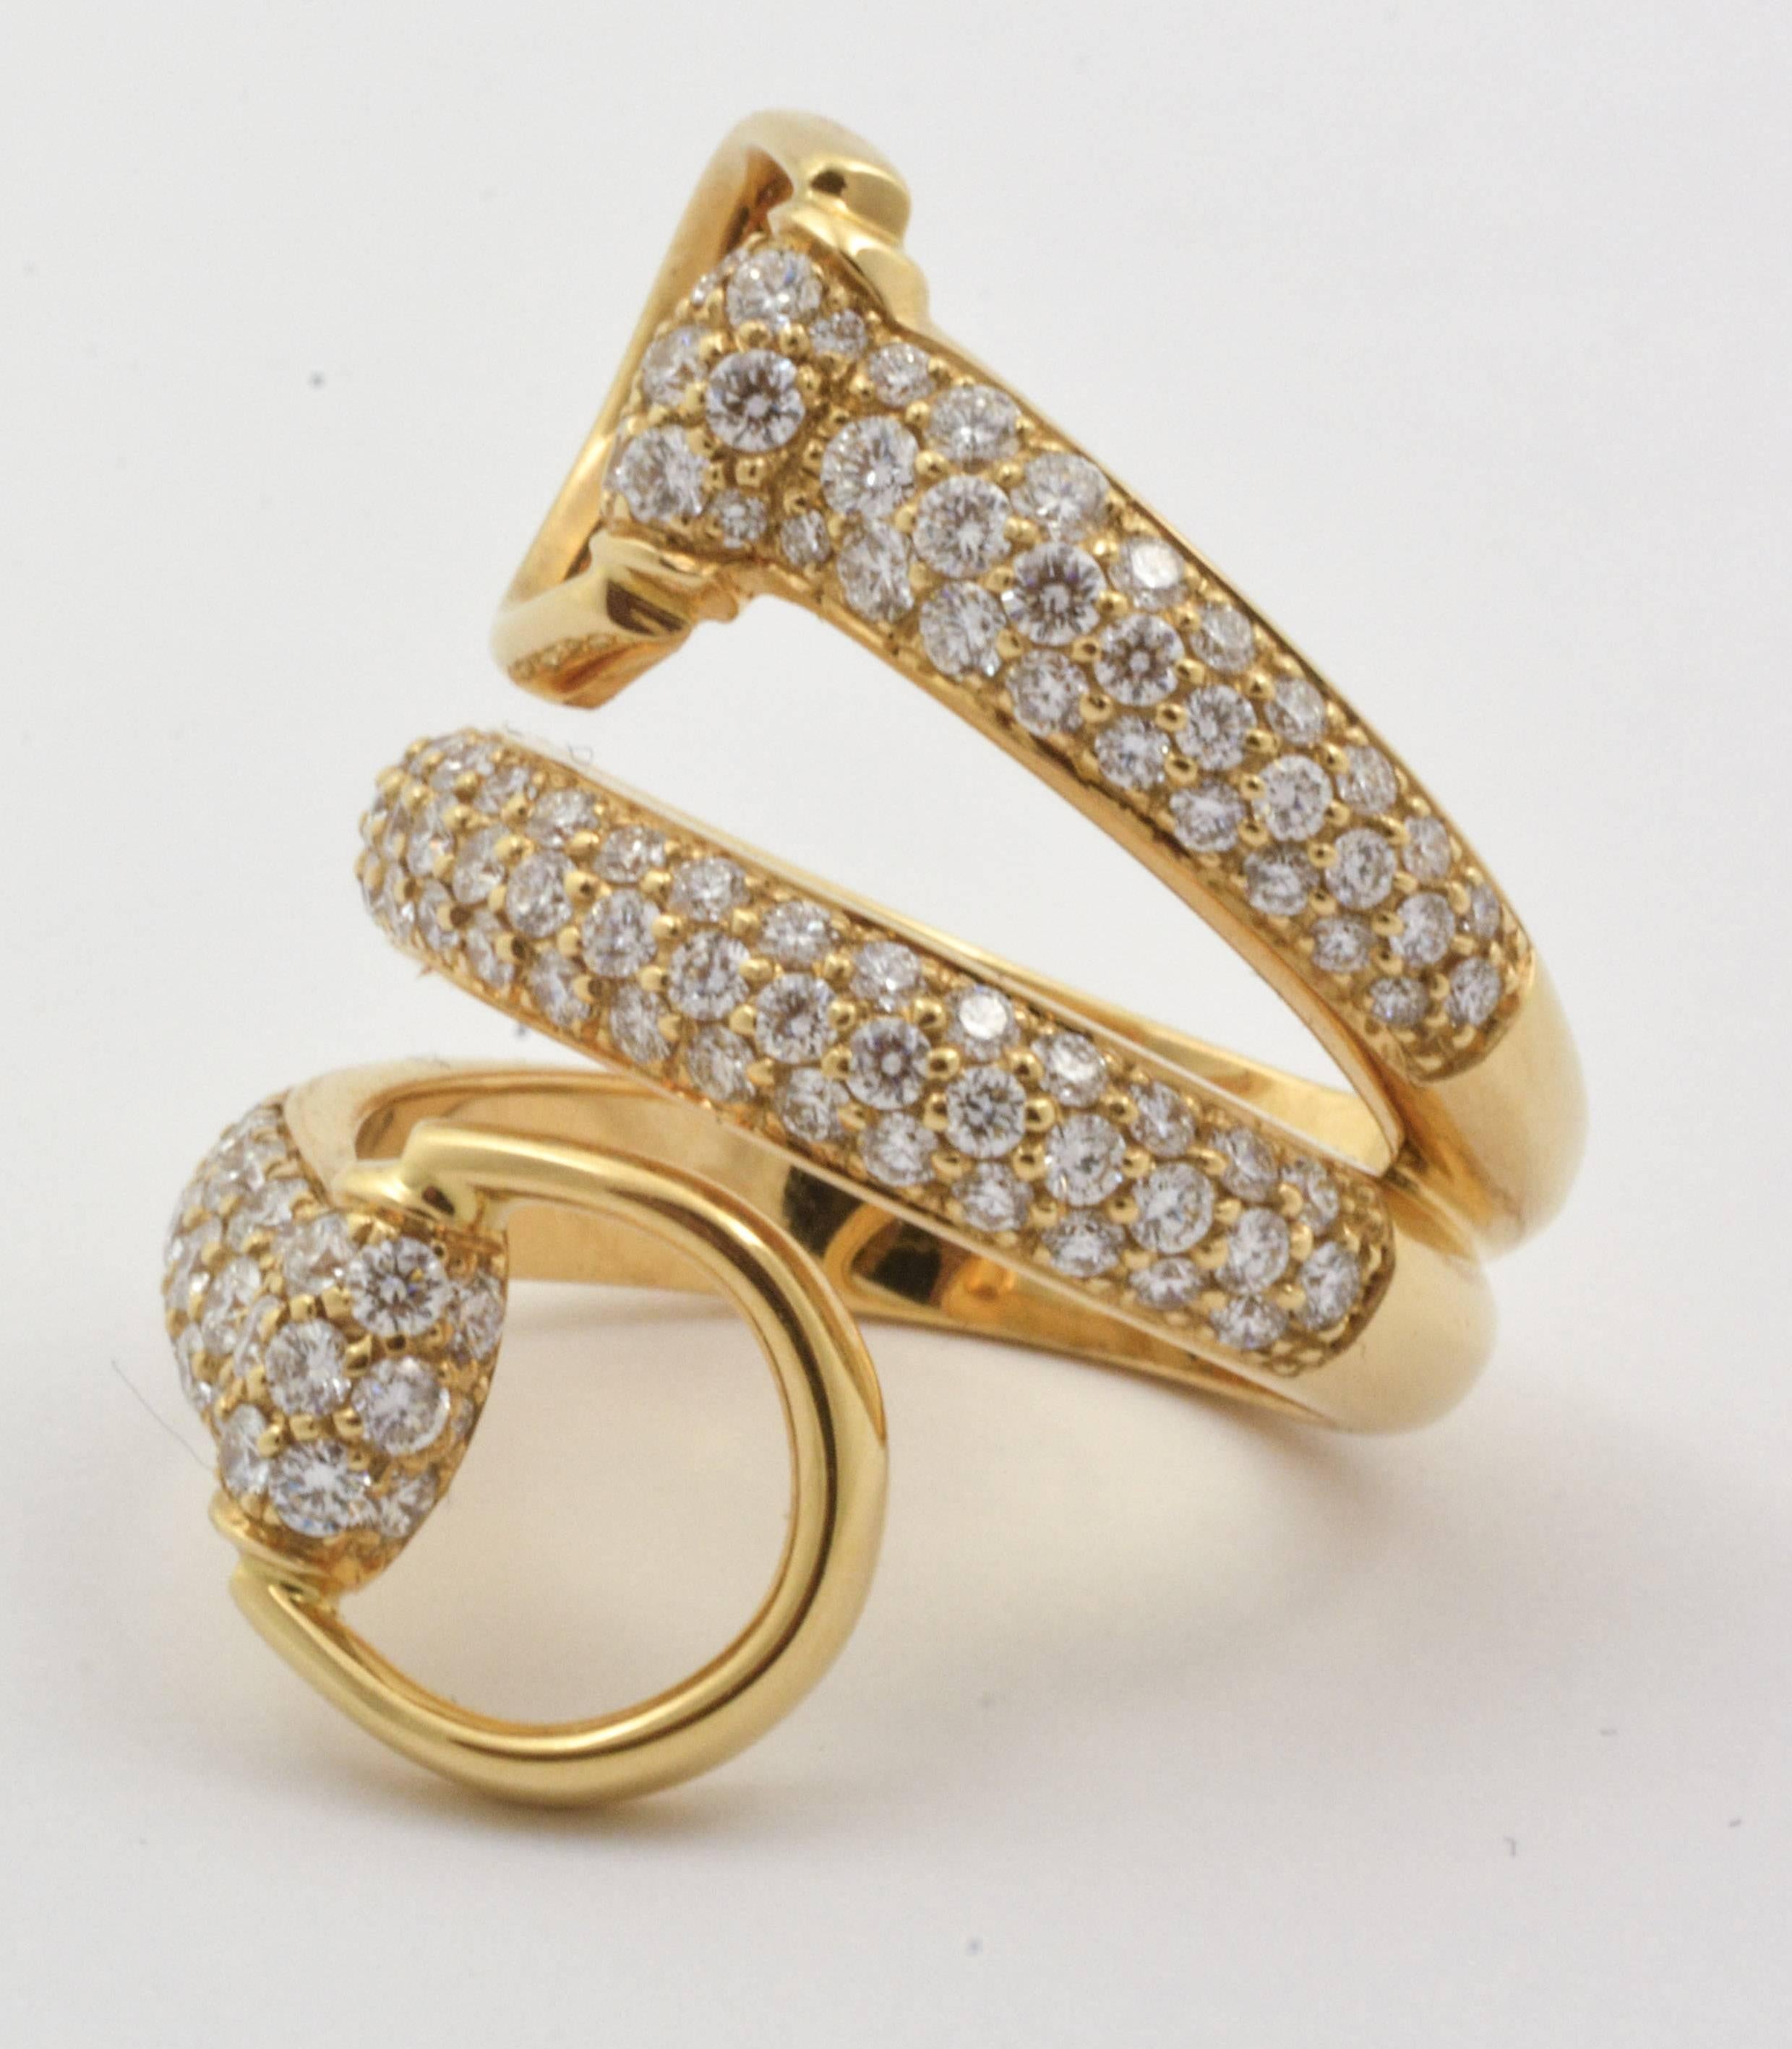 1.98 carats of round brilliant cut diamonds (clarity VS1 color G) wrap delicately around the finger in this gorgeous Gucci 18kt yellow gold horse bit contraire ring. Lovely loops of gold at either end of the ring give this Gucci diamond piece a